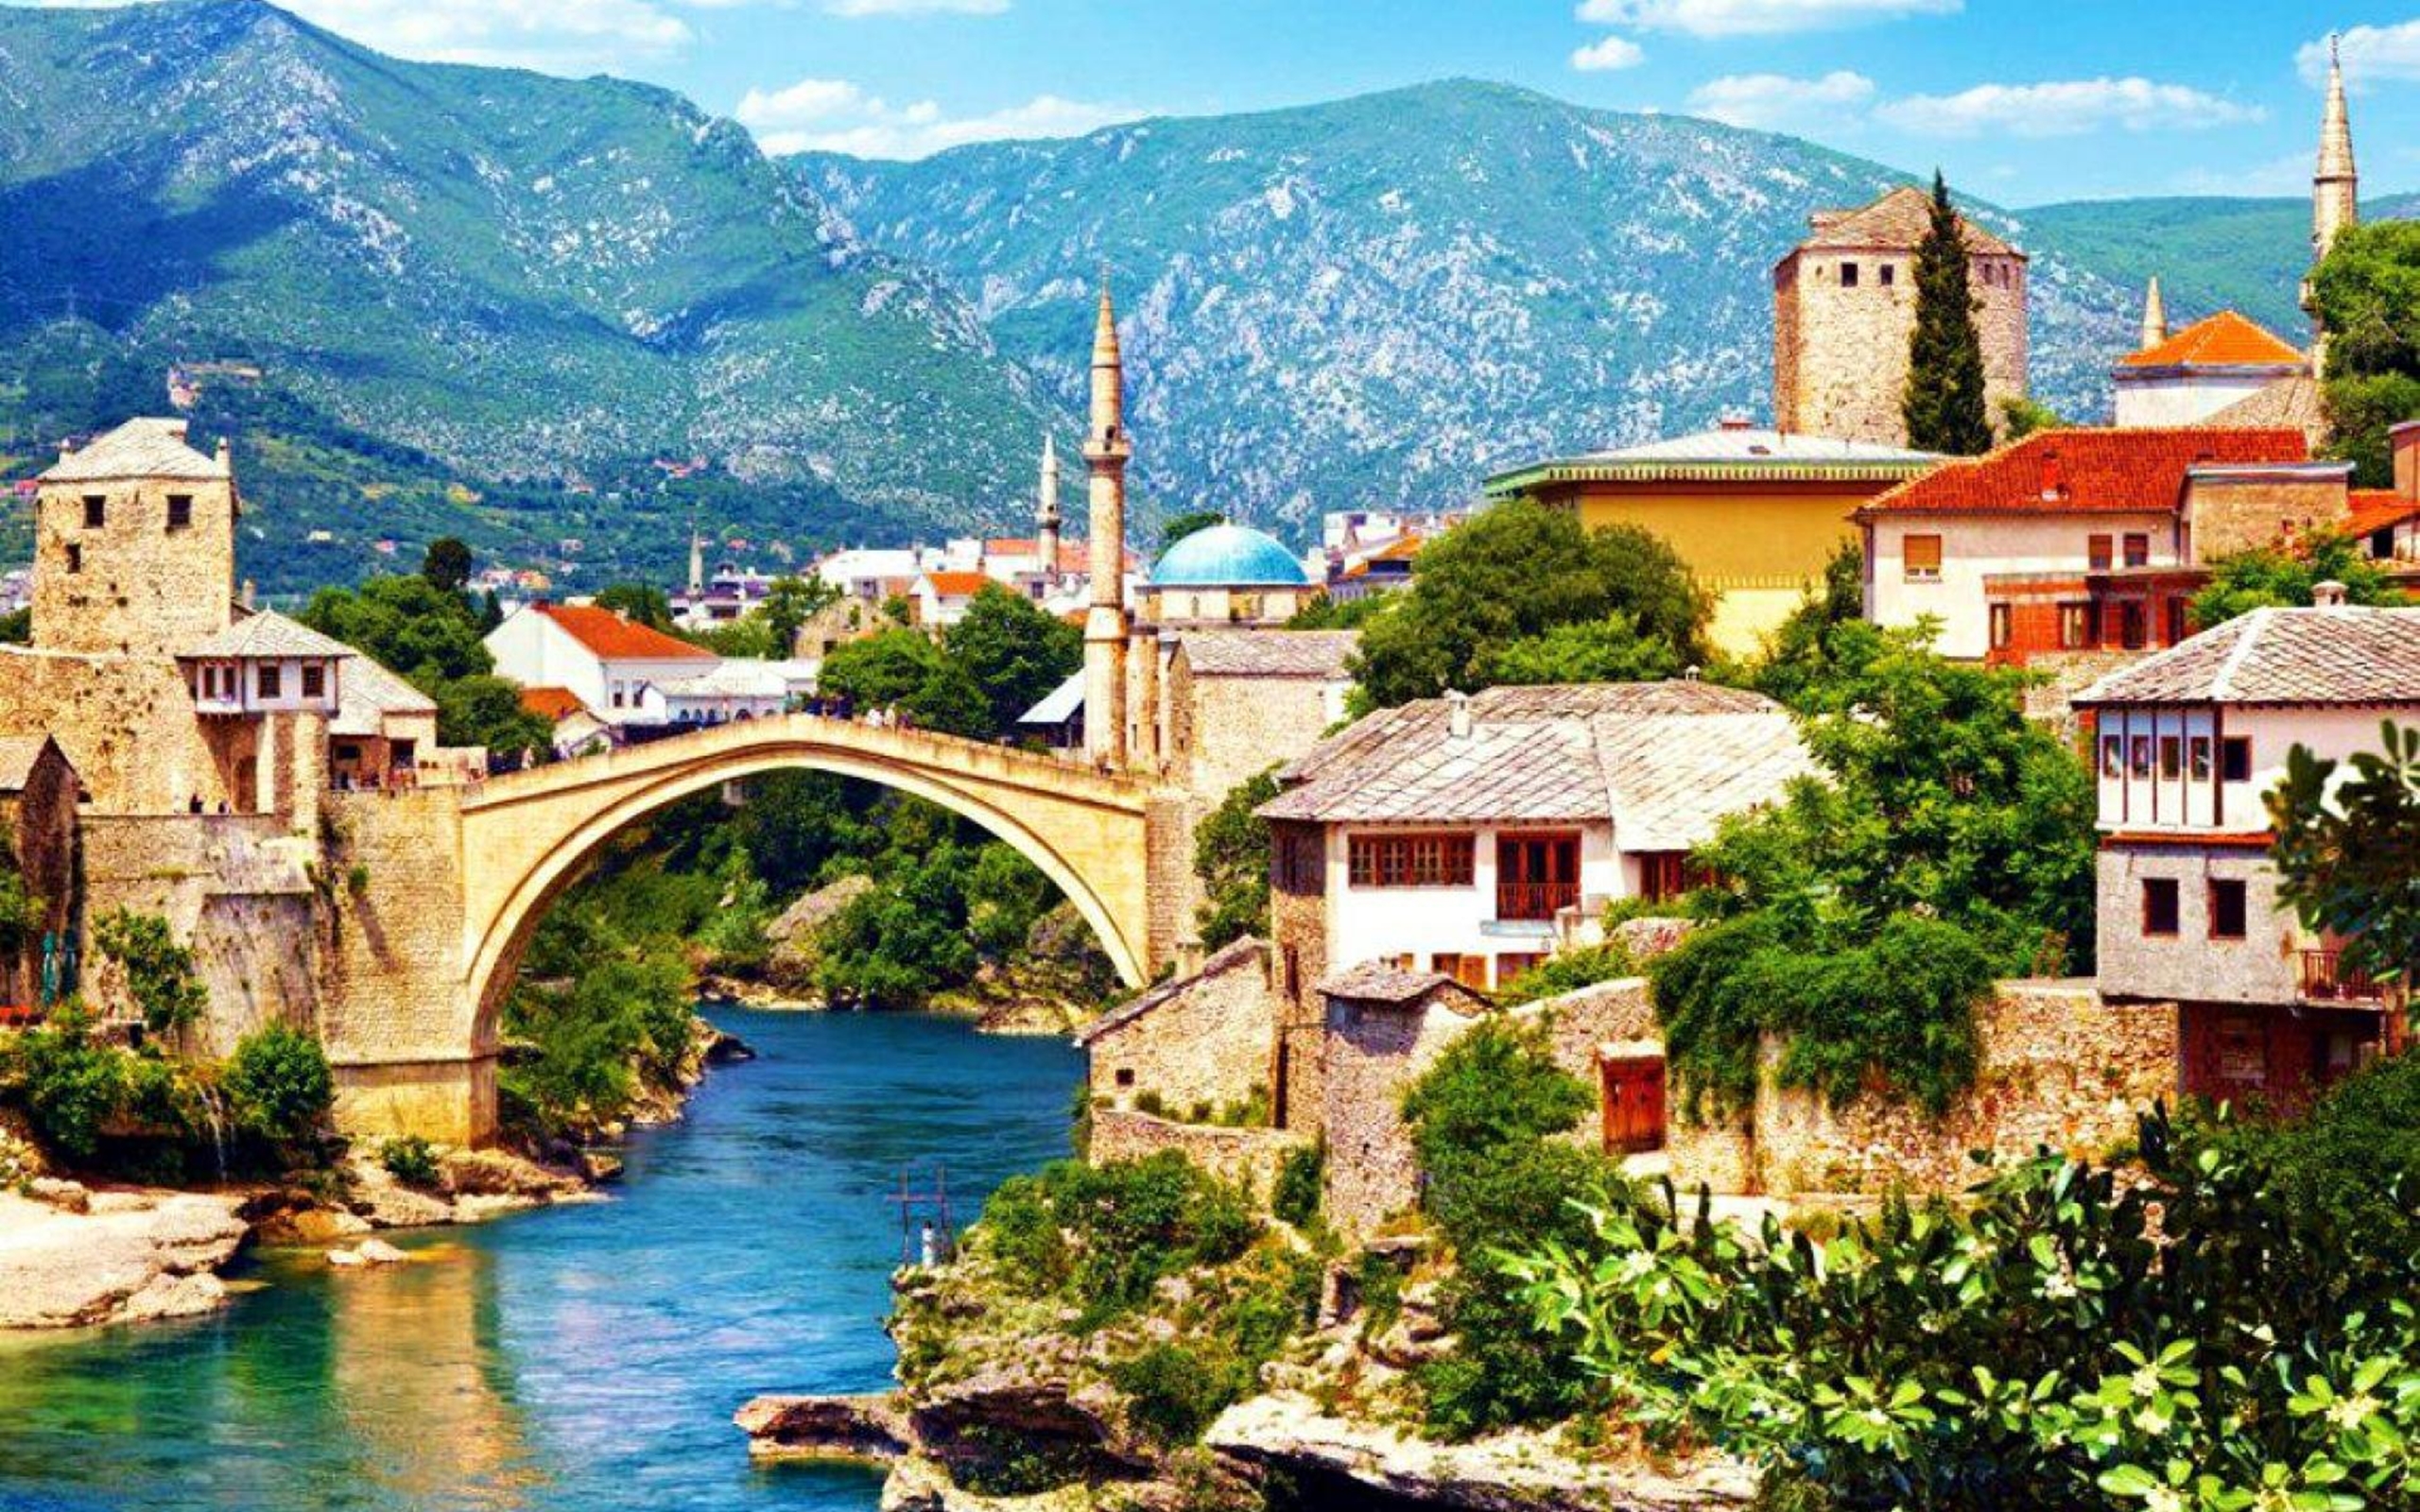 Old Town Mostar in Bosnia